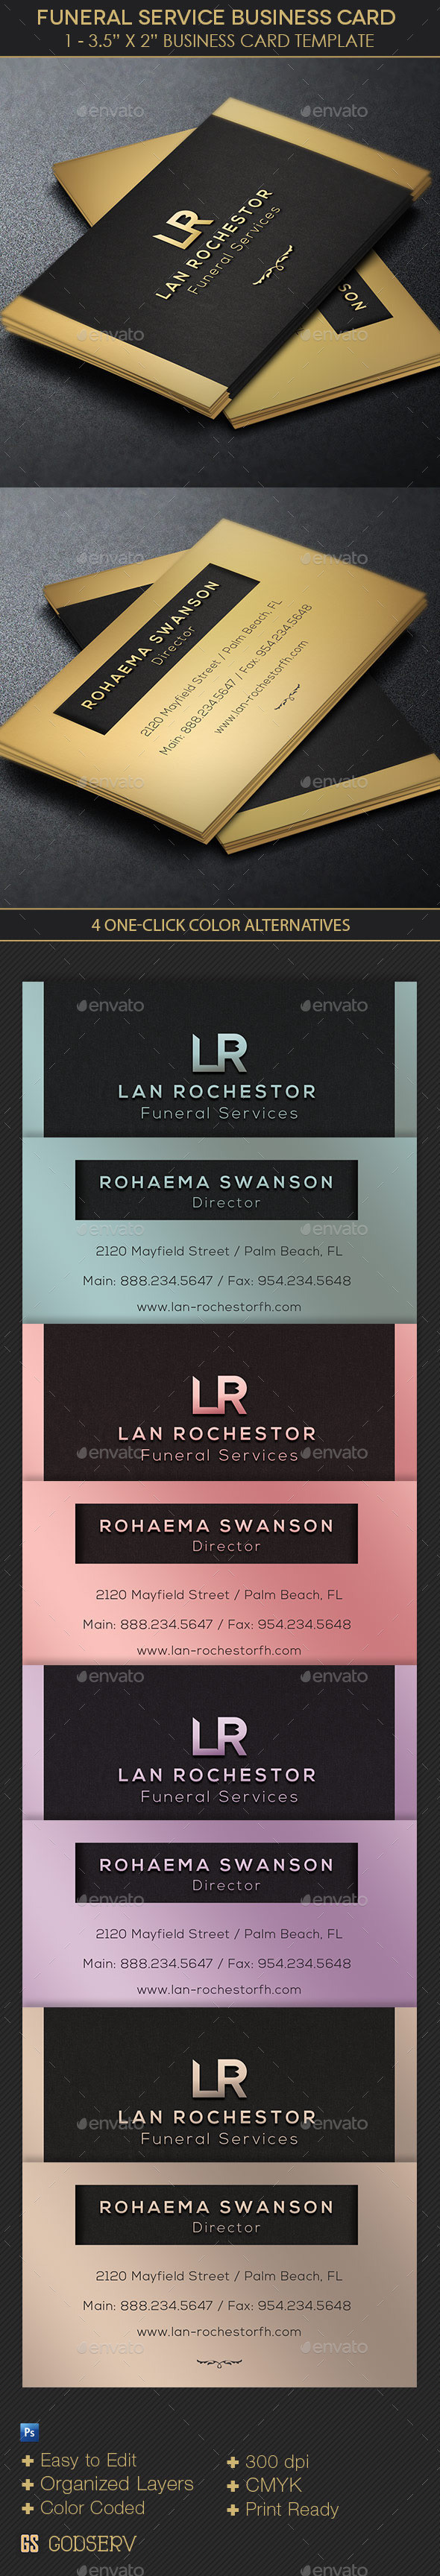 Funeral service business card template preview